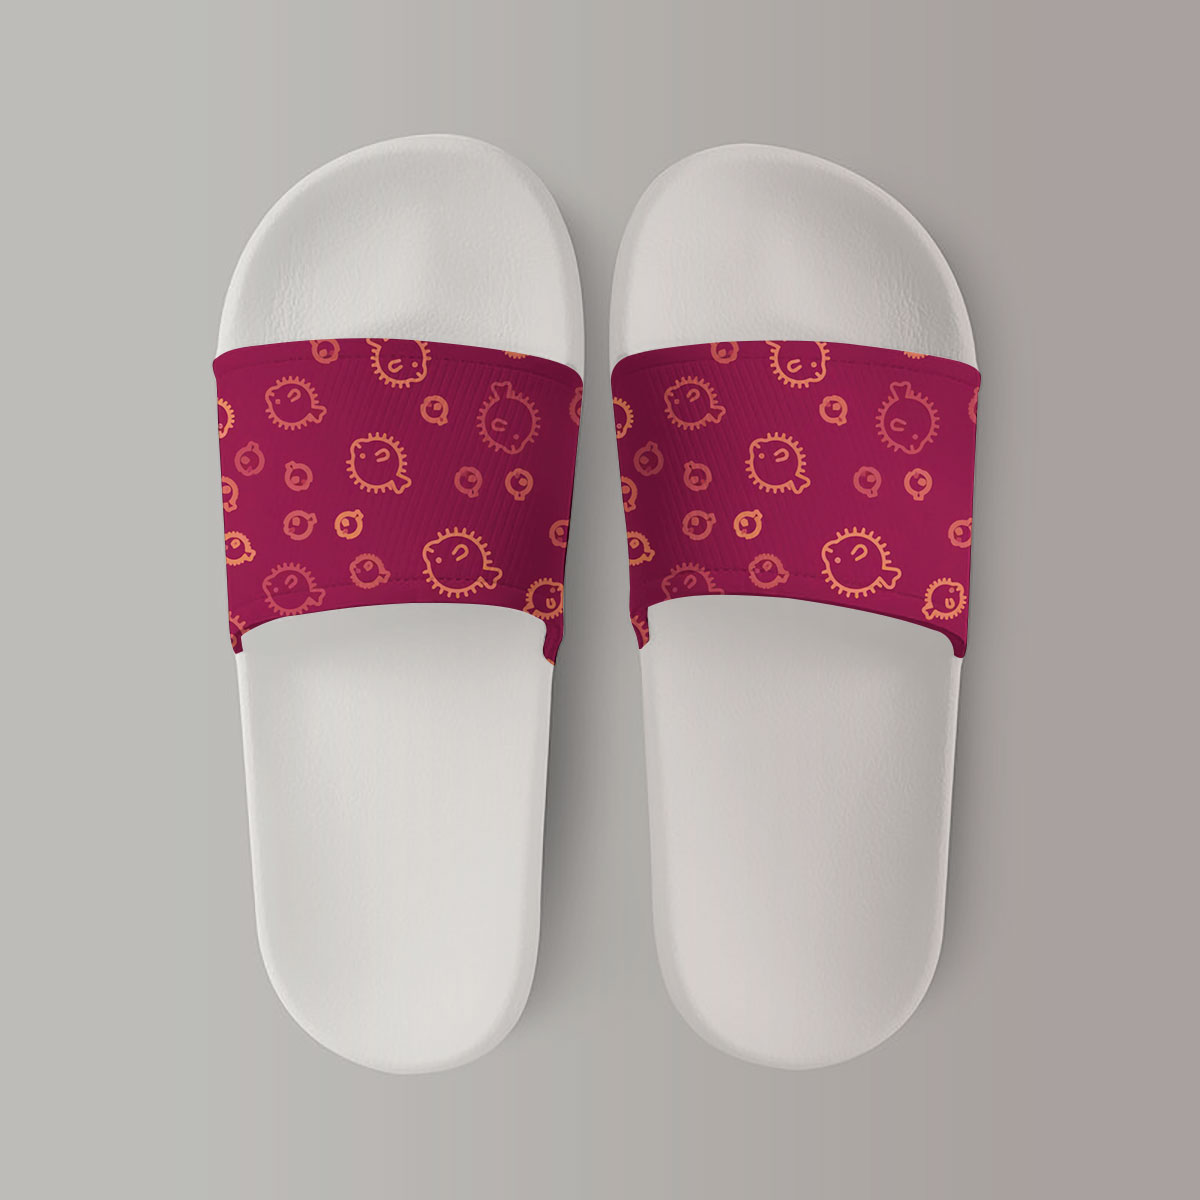 Funny Red Puffer Fish Sandal